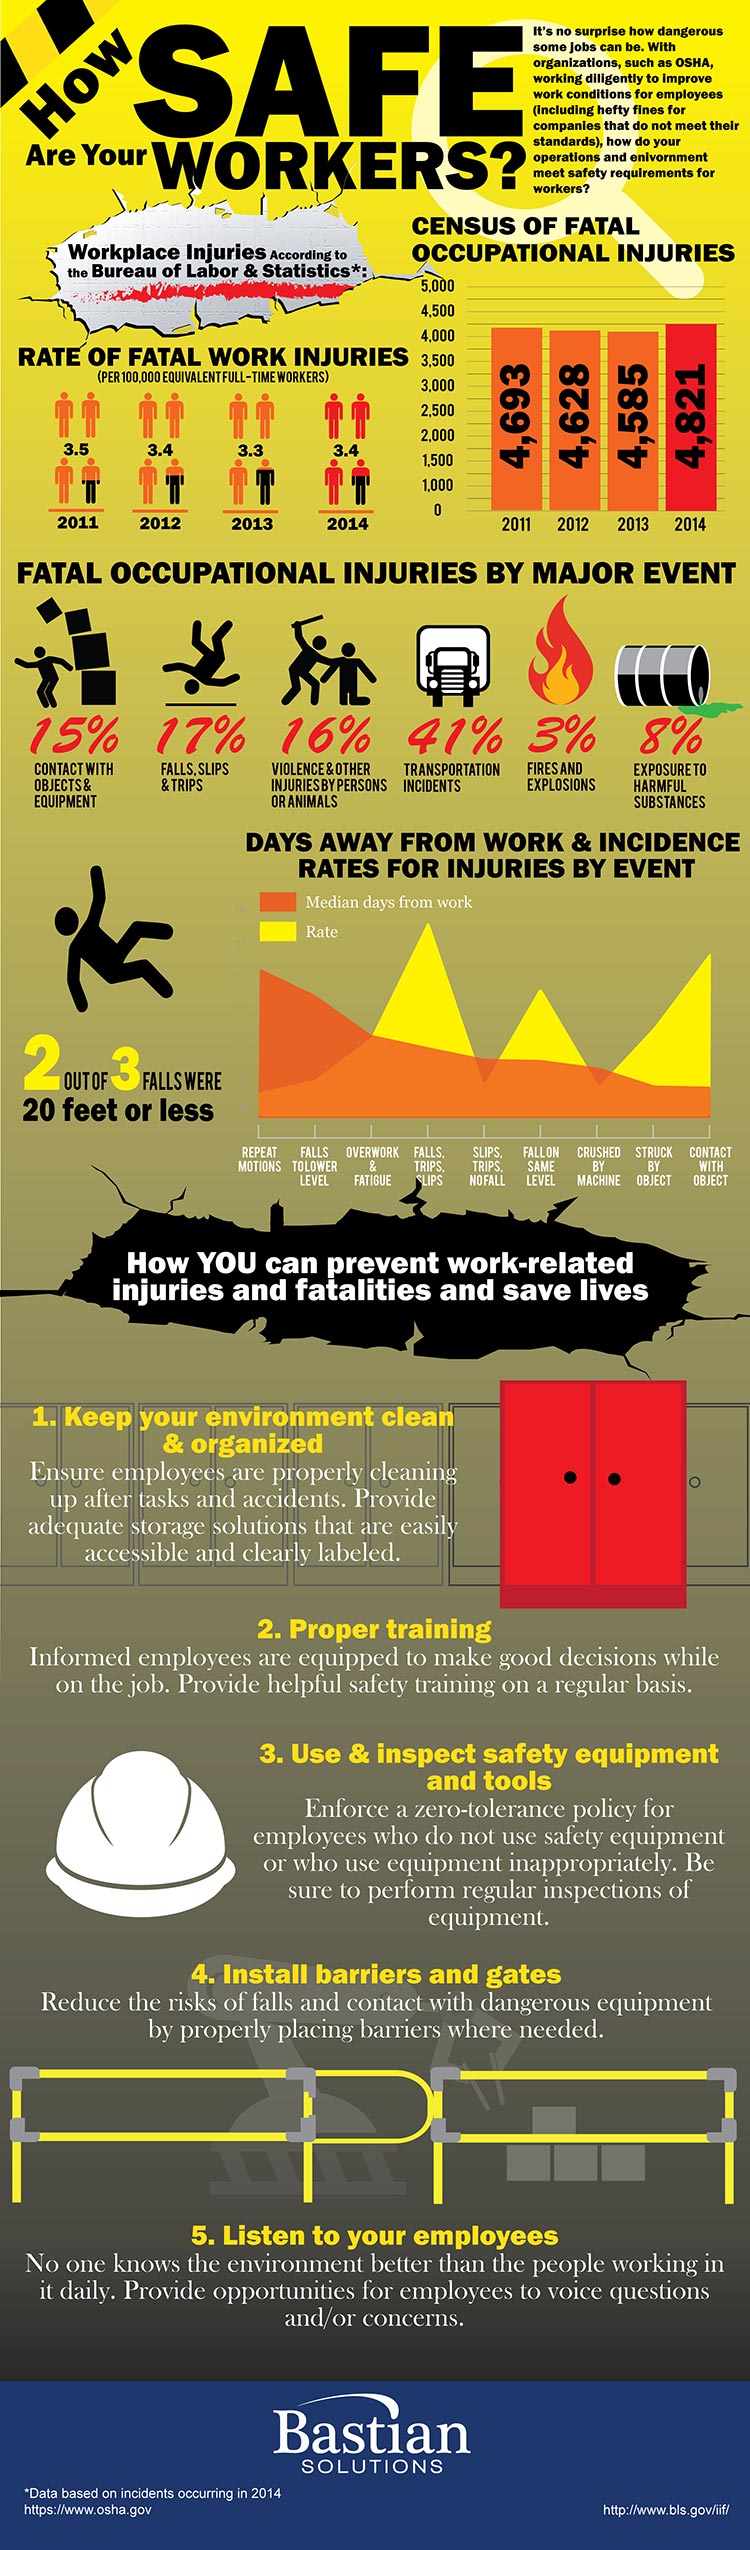 Employee safety infographic